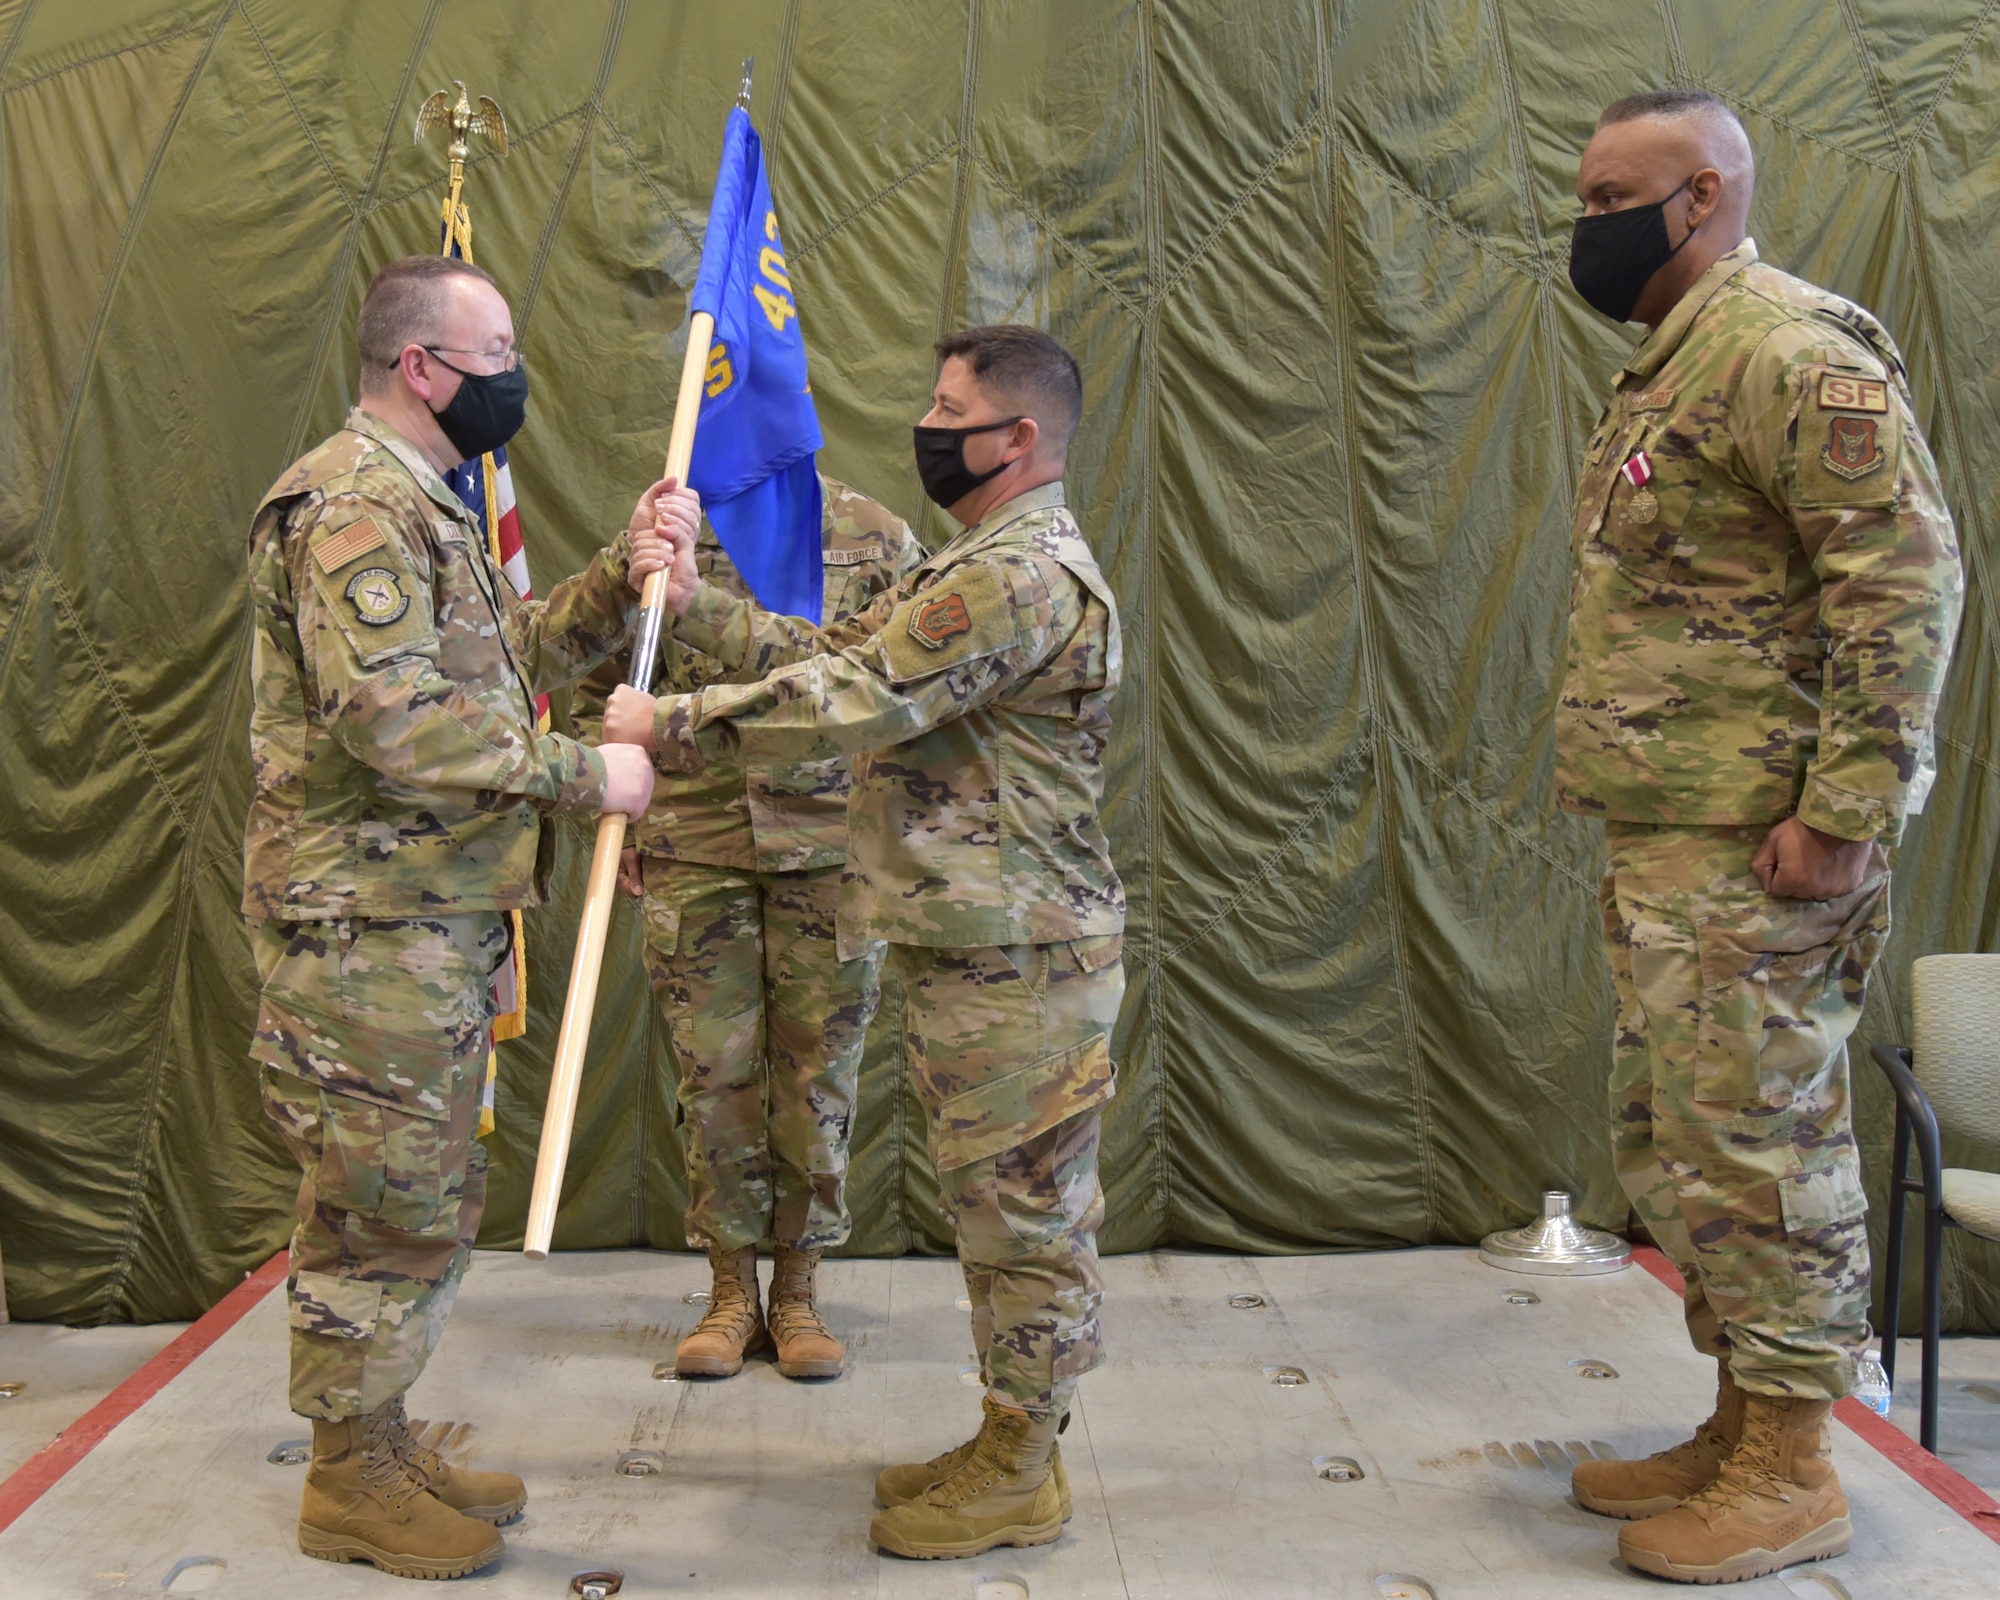 Lt. Col. Reginald G. Trujillo (center), 403rd Mission Support Group commander, hands the 403rd Security Forces Squadron guidon to Lt. Col. James A. Coleman (left), establishing him as the new commander of the 403rd SFS, during a ceremony in the 41st Aerial Port Squadron at Keesler Air Force Base, Mississippi, Dec. 5, 2020. (U.S. Air Force photo by Tech. Sgt. Michael Farrar)